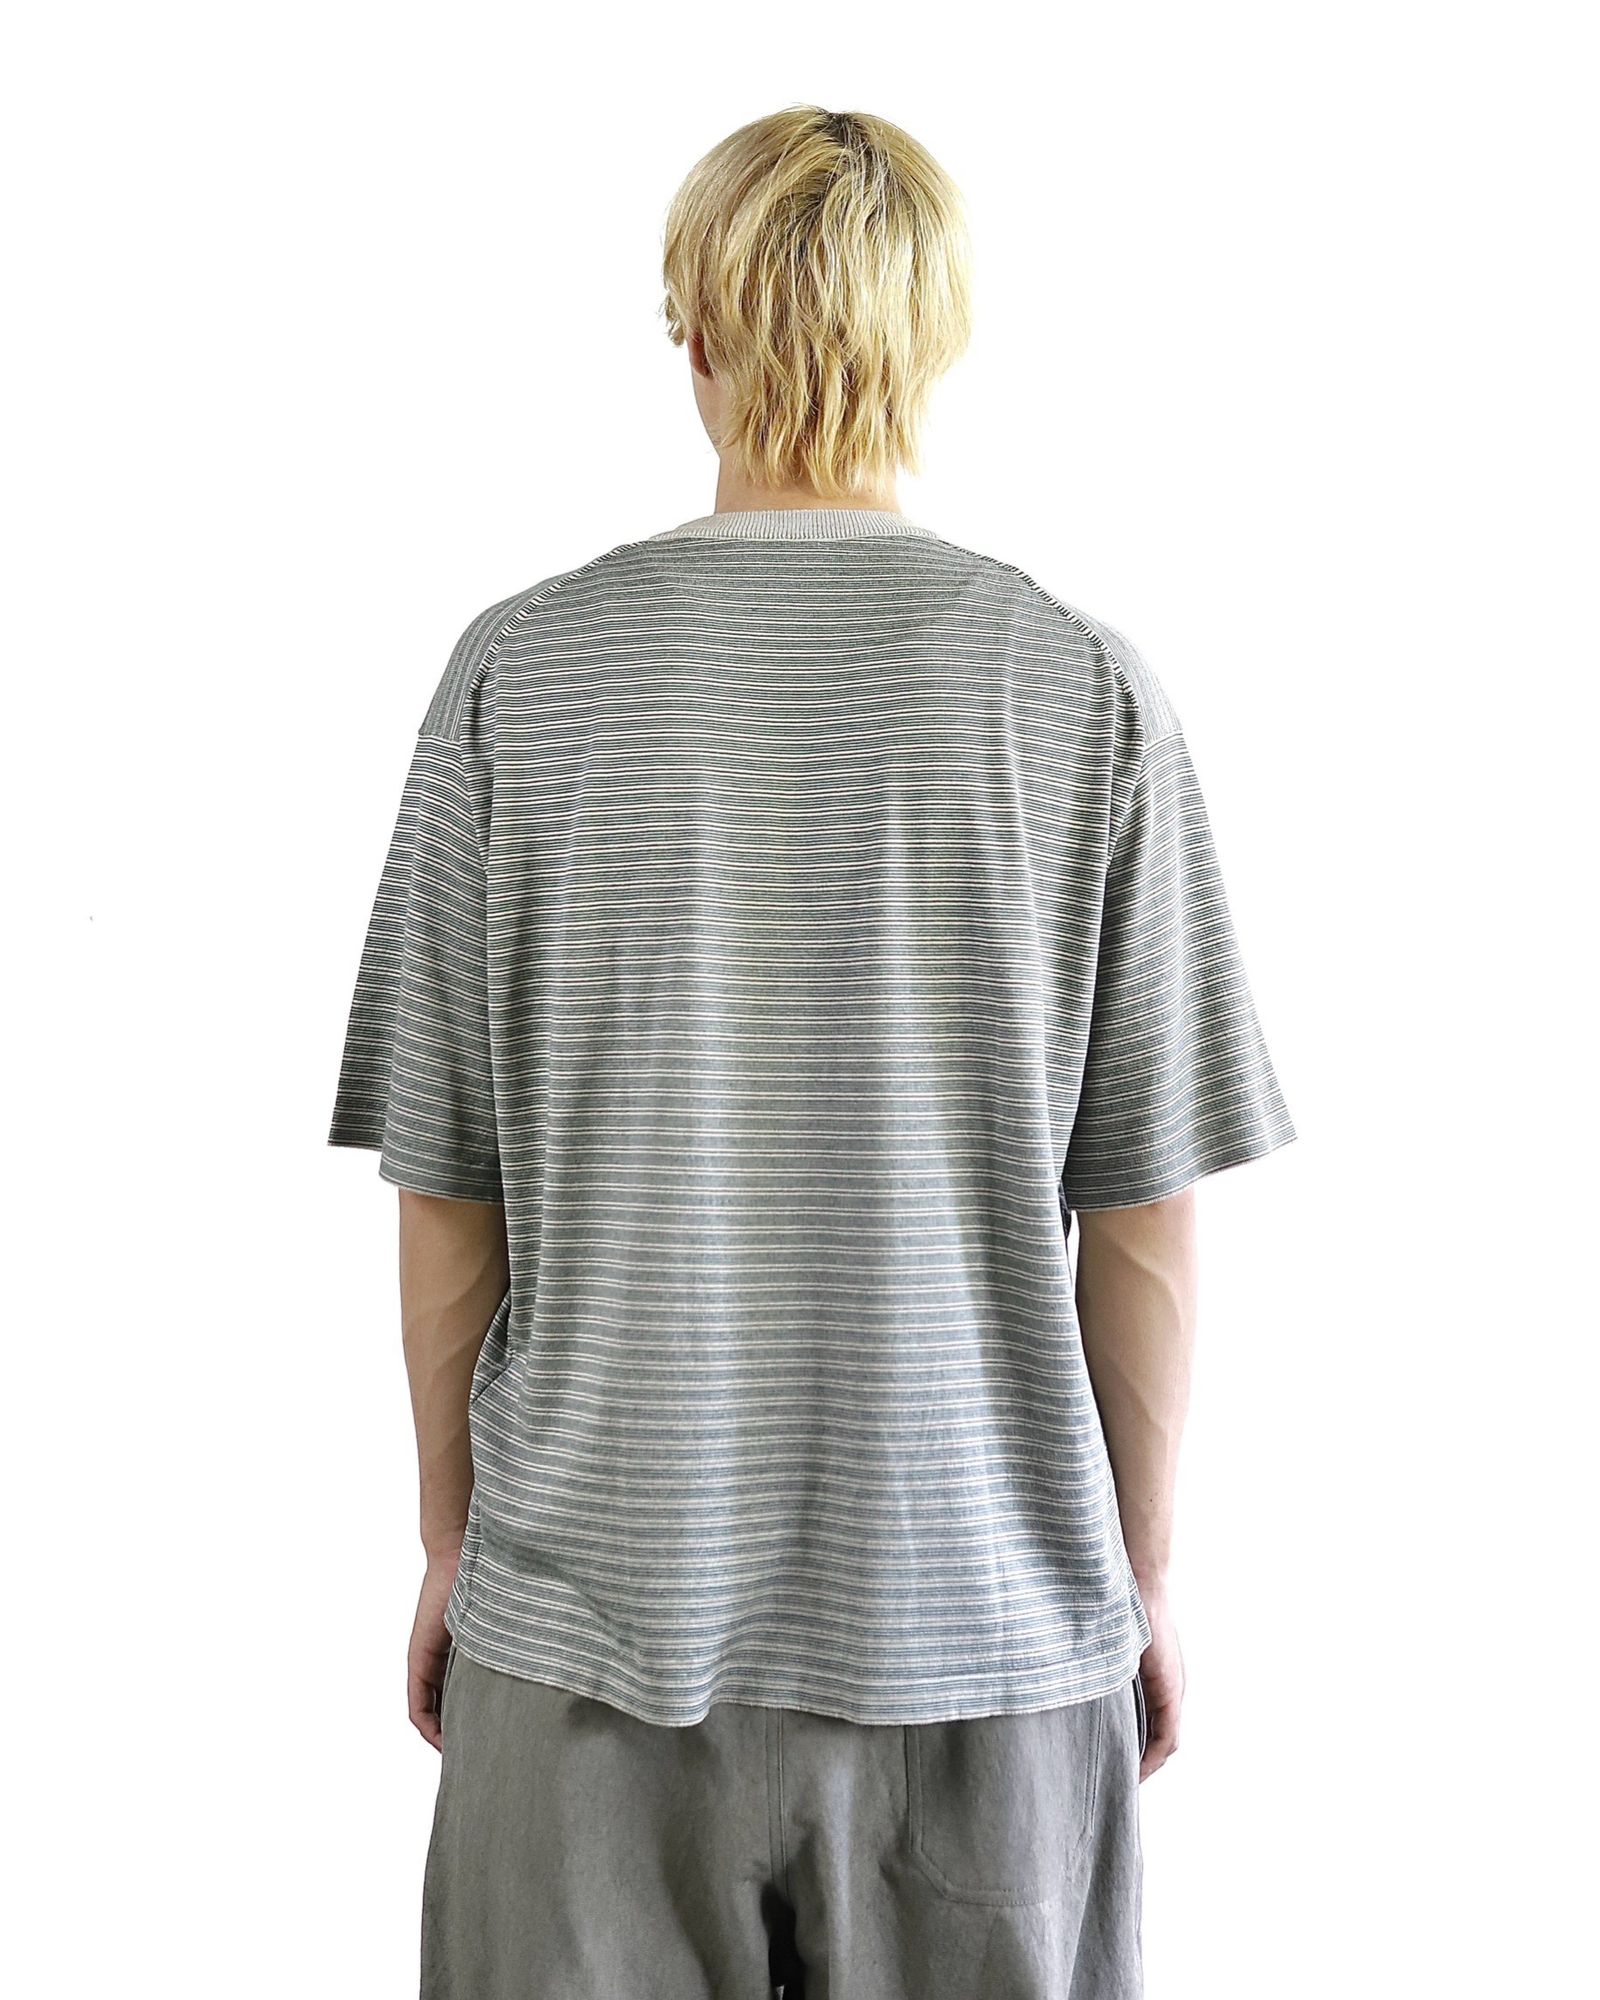 A.PRESSE 24SS High Gauge S/S Striped T-Shirt style 2024.4.13 